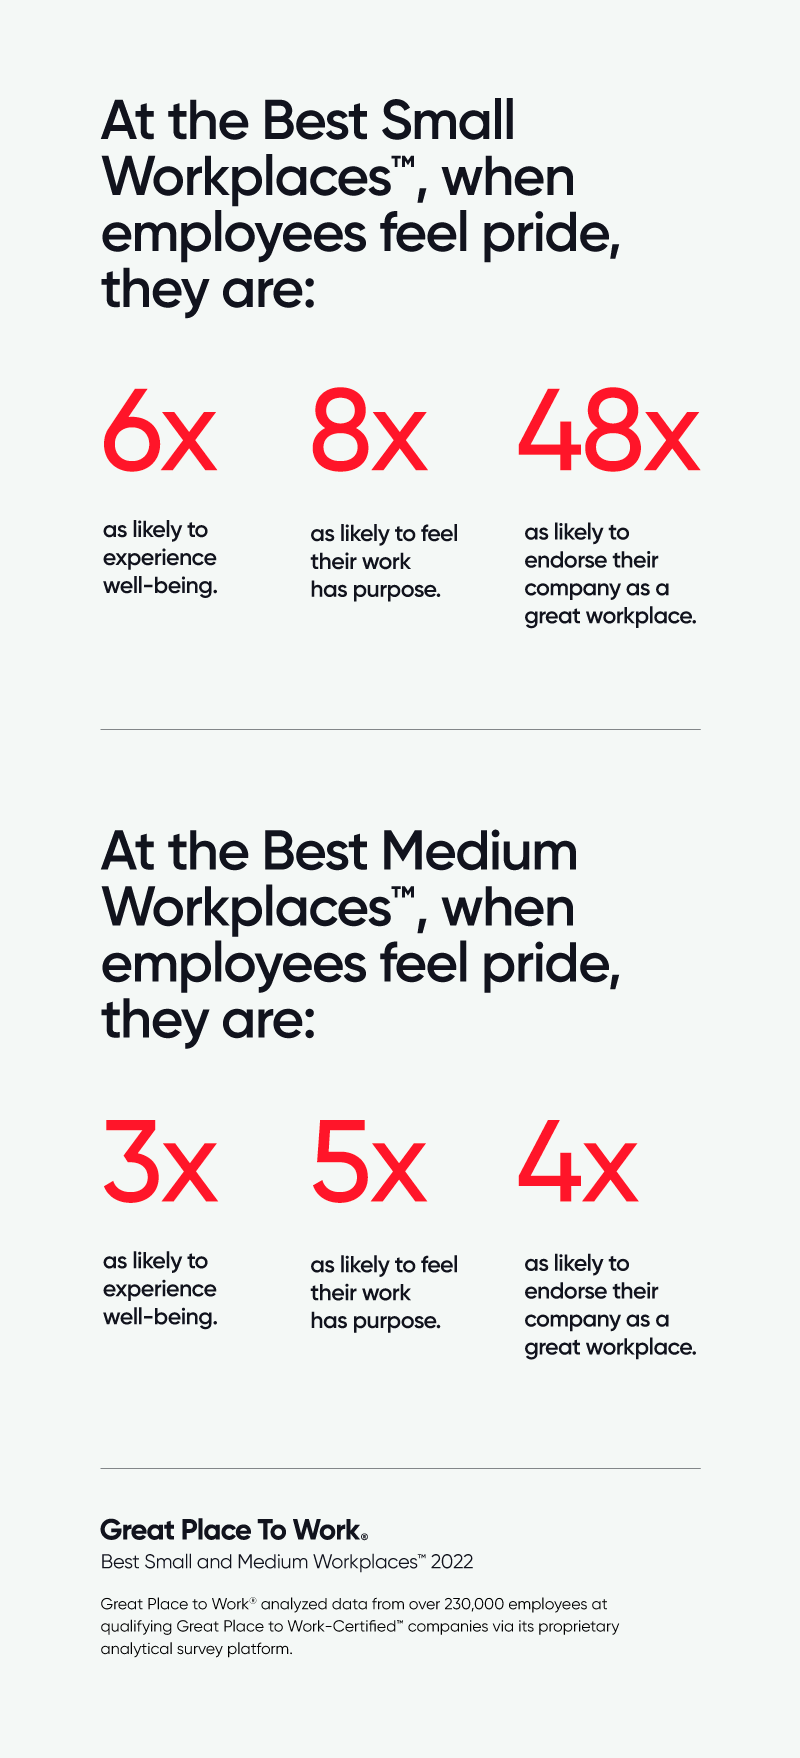 4 myths about small and medium workplaces debunked 3